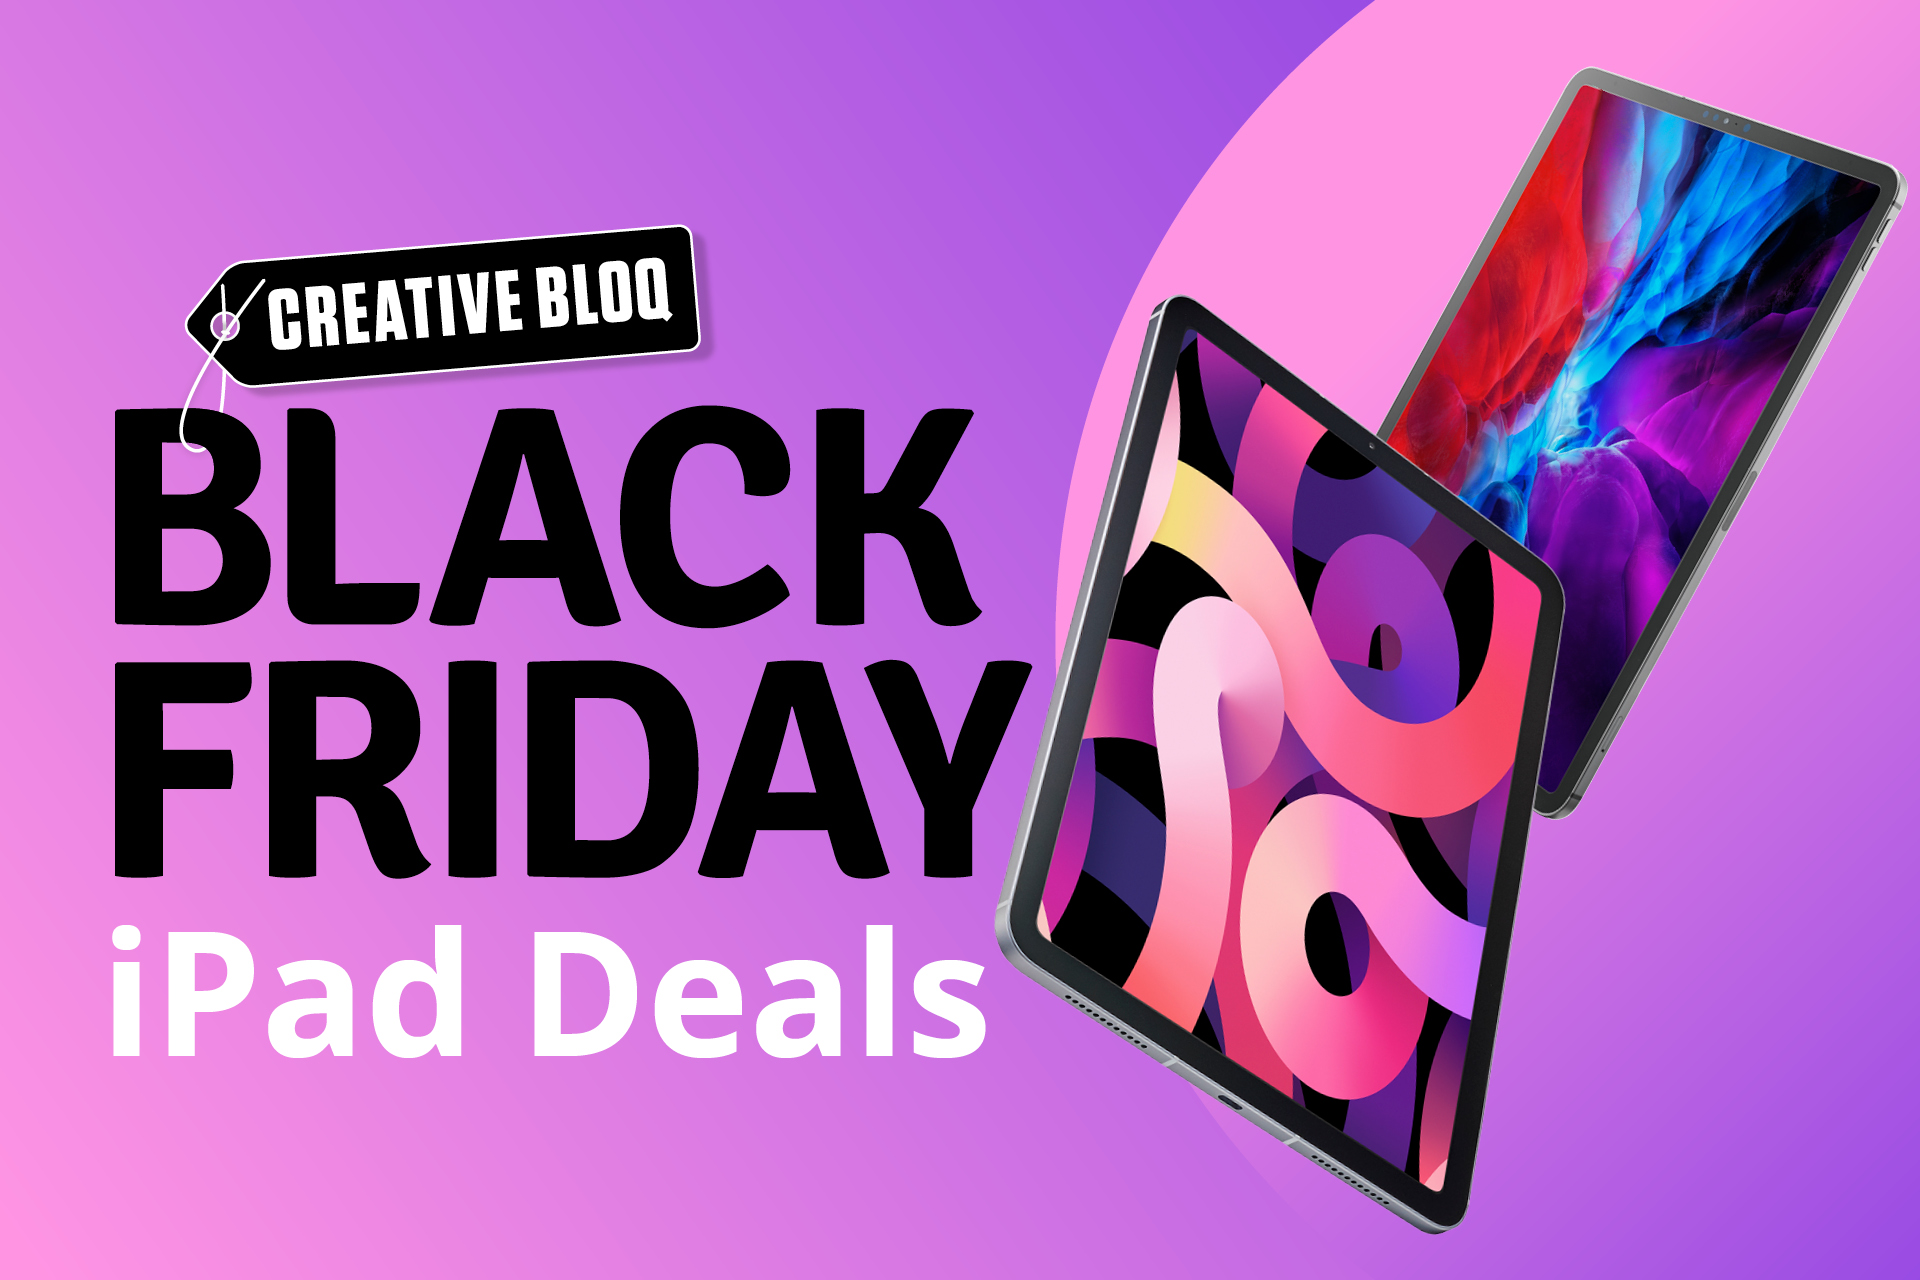 Black Friday & Cyber Monday iPad deals live blog: Best prices on Apple iPad,  iPad Pro and more | Creative Bloq